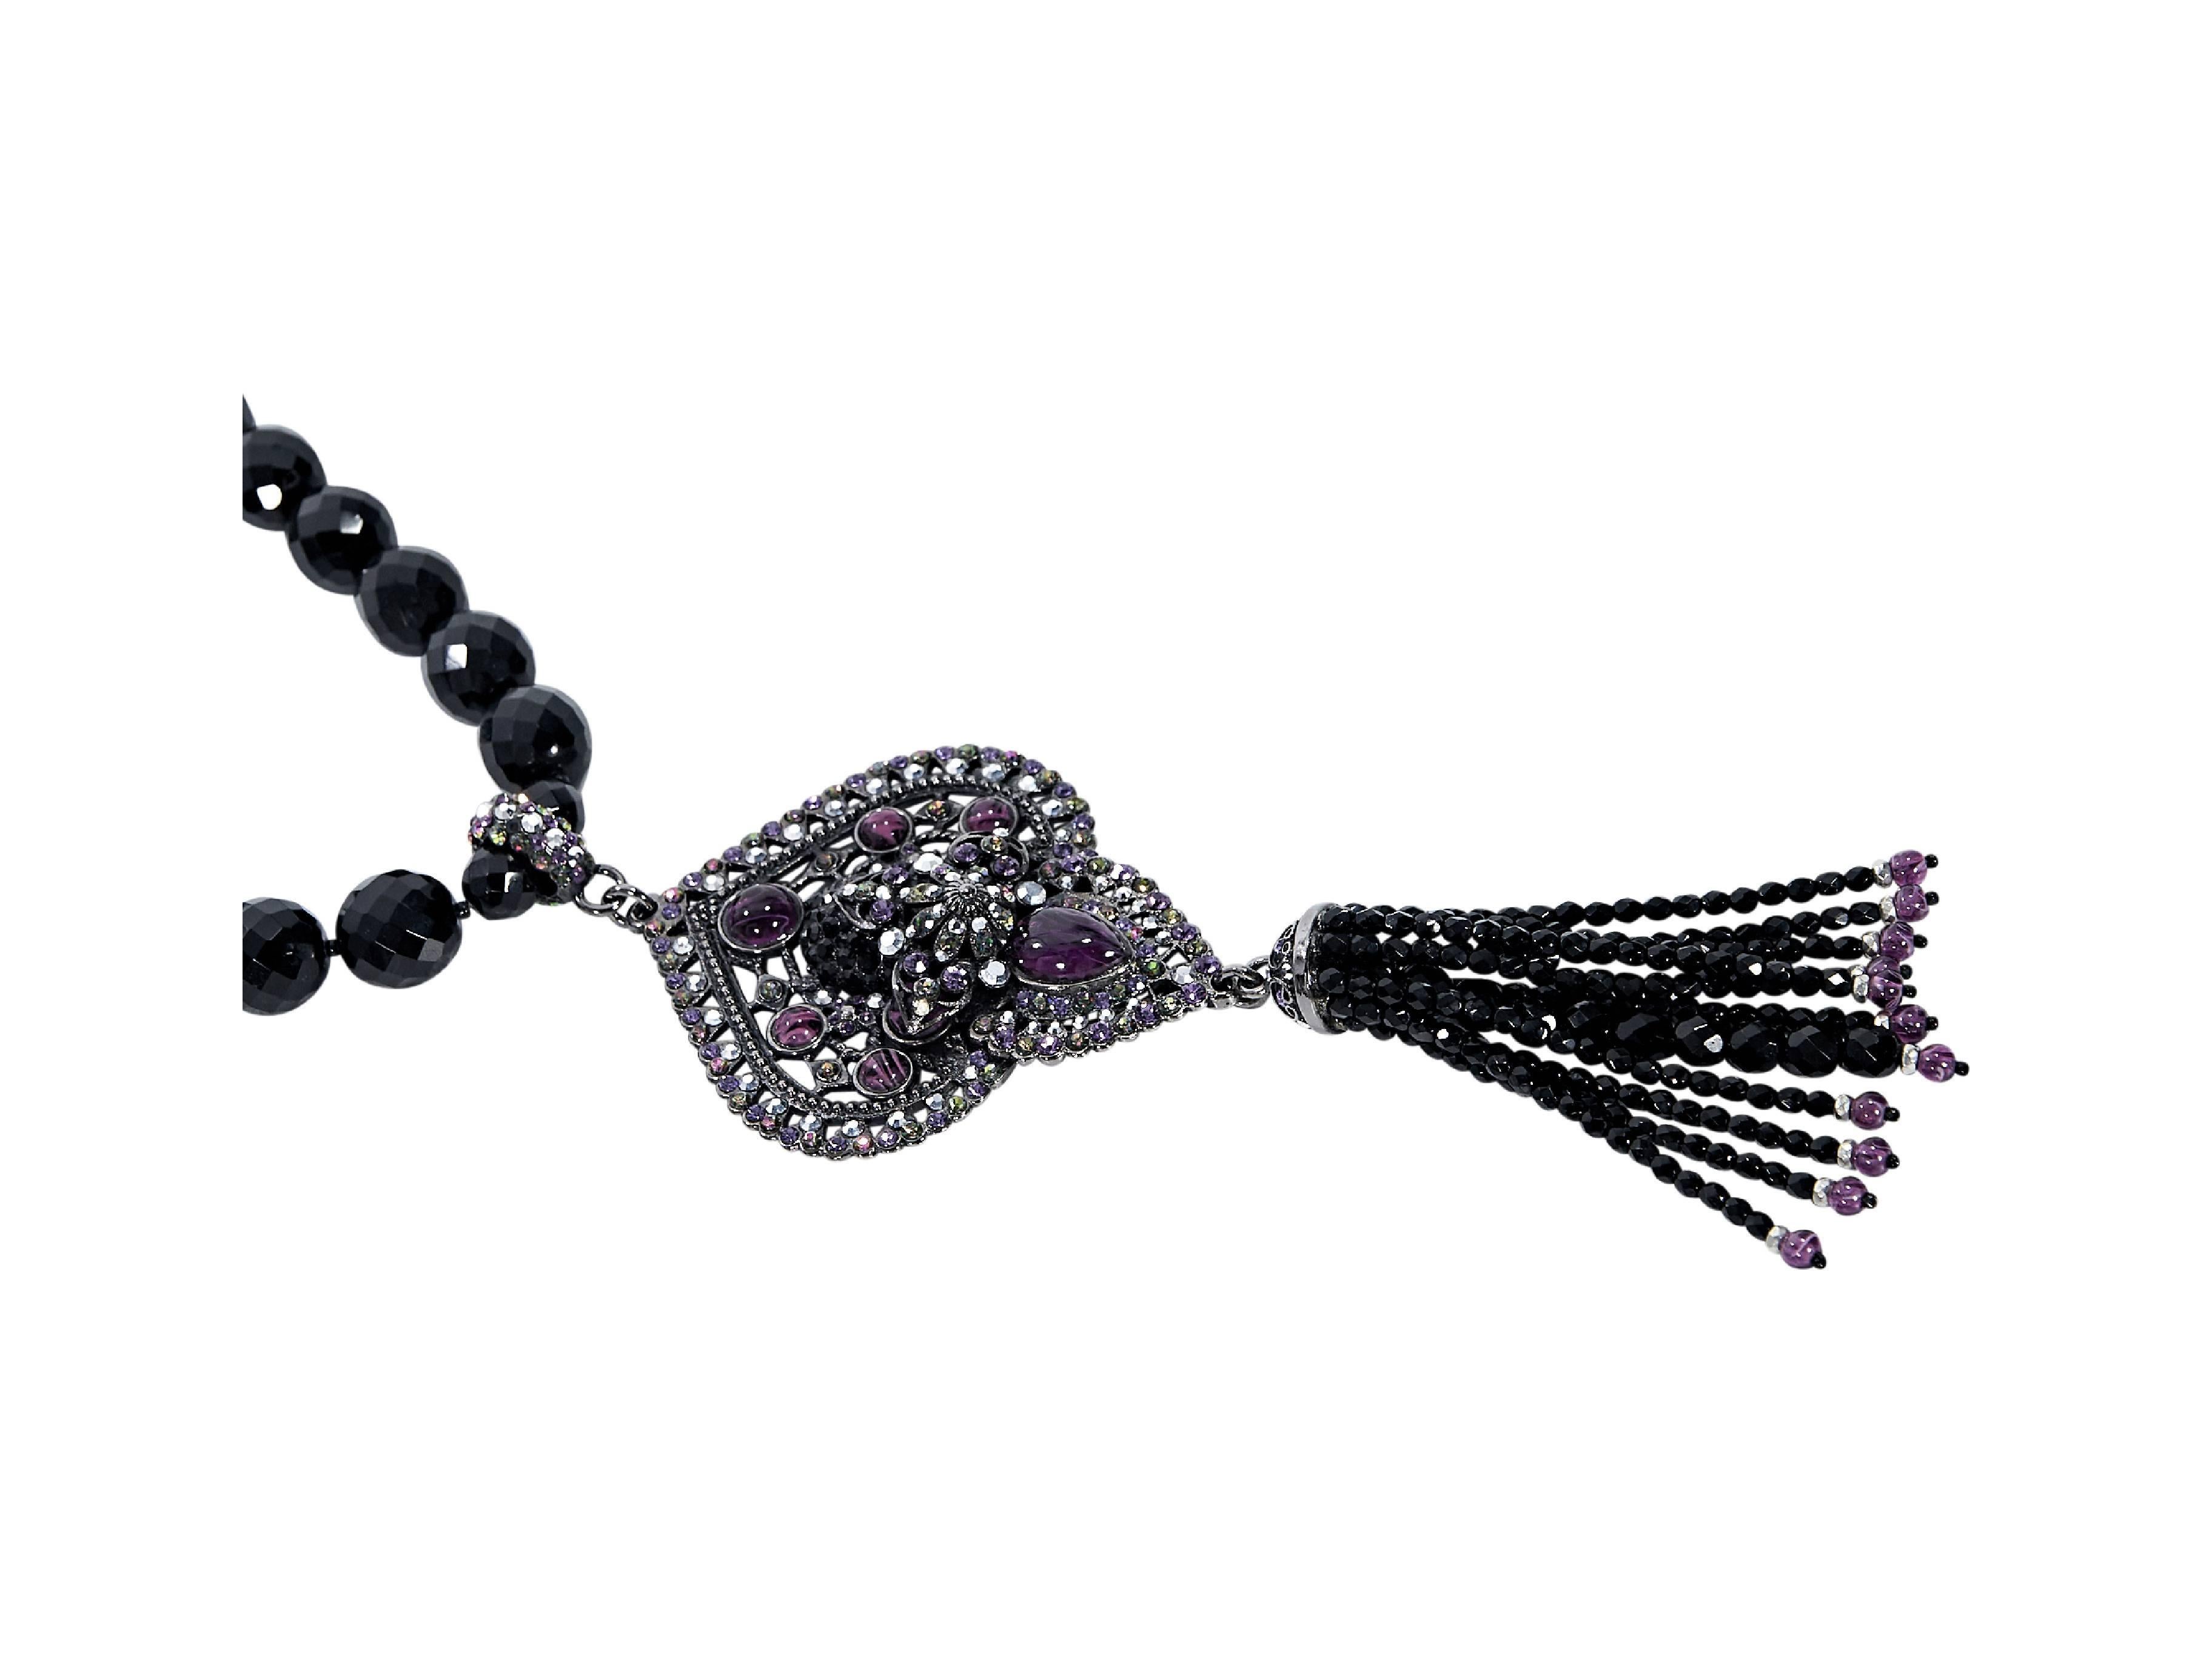 Product details:  Black crystal statement necklace by Barrera.  Beaded single strand.  Hanging pendant with tassel.  
Condition: Pre-owned. Very good.

Est. Retail $ 695.00
